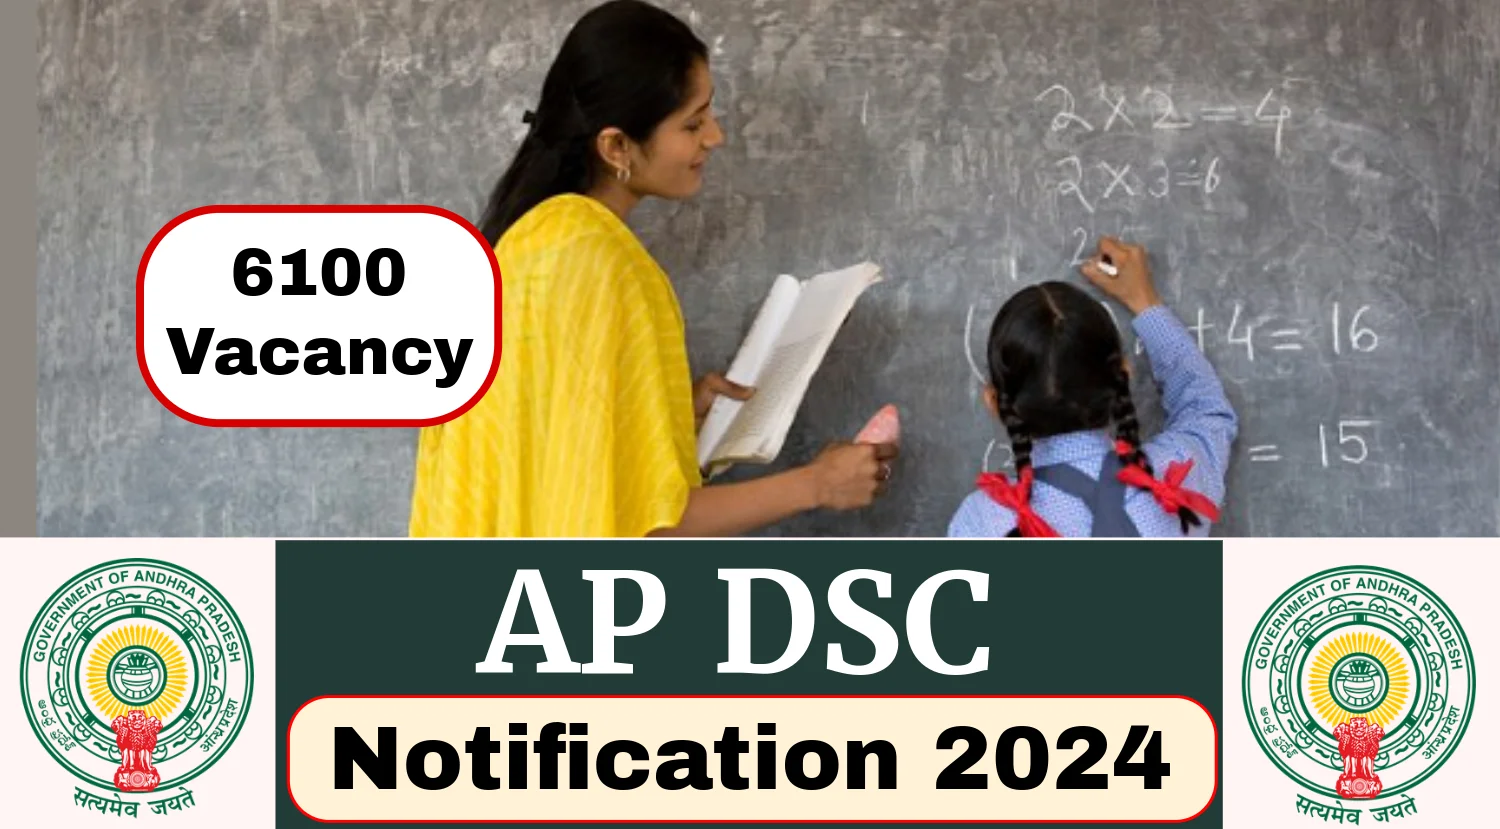 AP DSC Notification 2024 Out For 6100 TGT, PGT & Other Posts